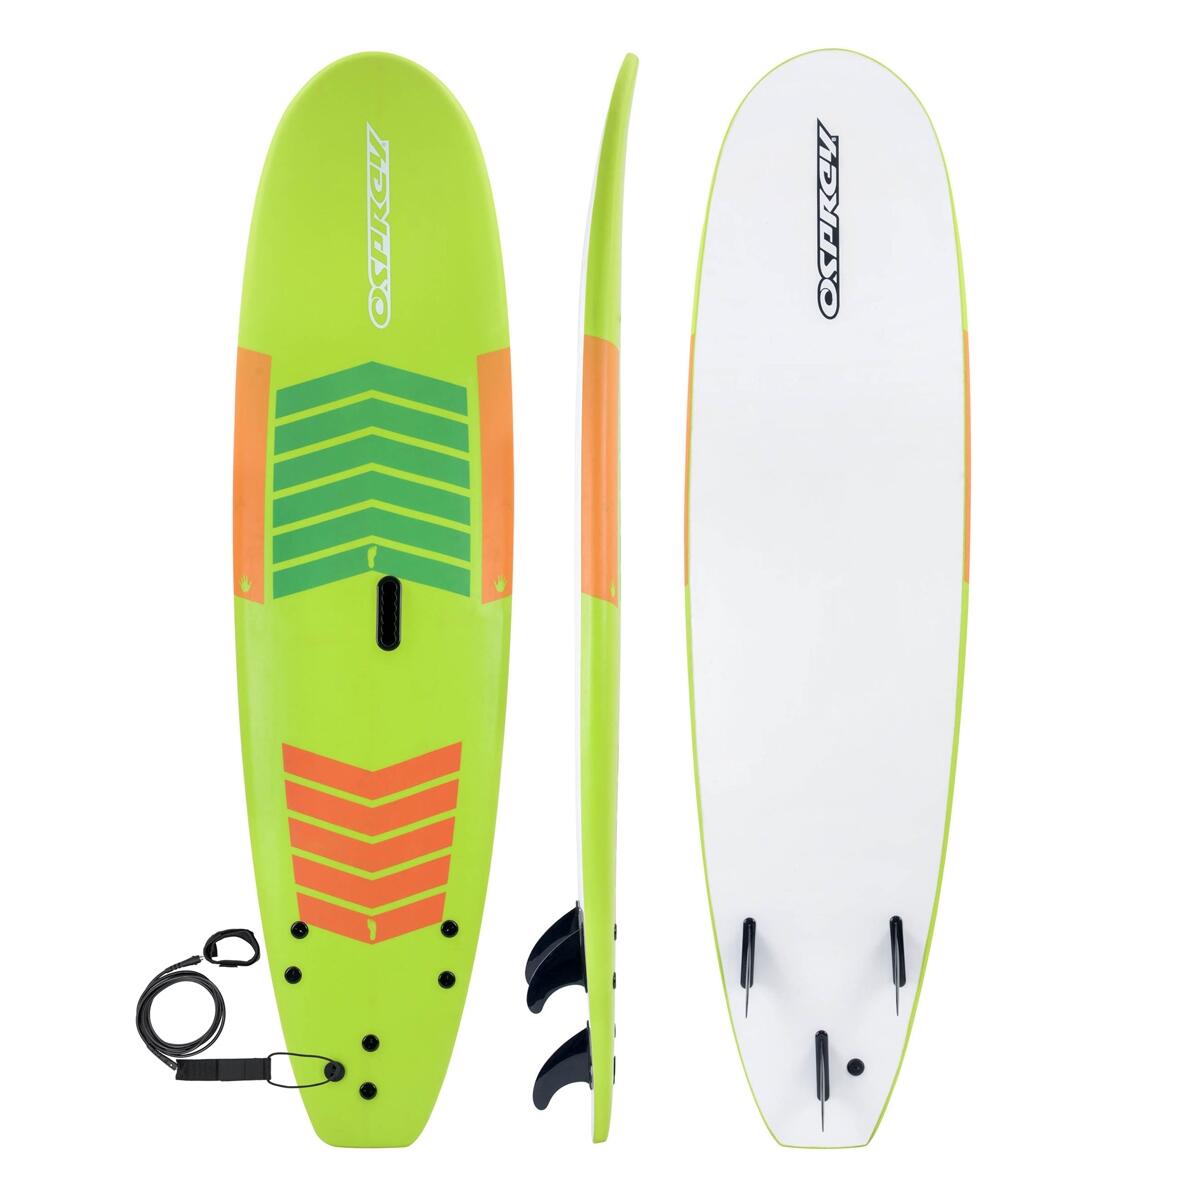 OSPREY ACTION SPORTS XPE Foam Surfboard with Leash and Fins, Complete Set